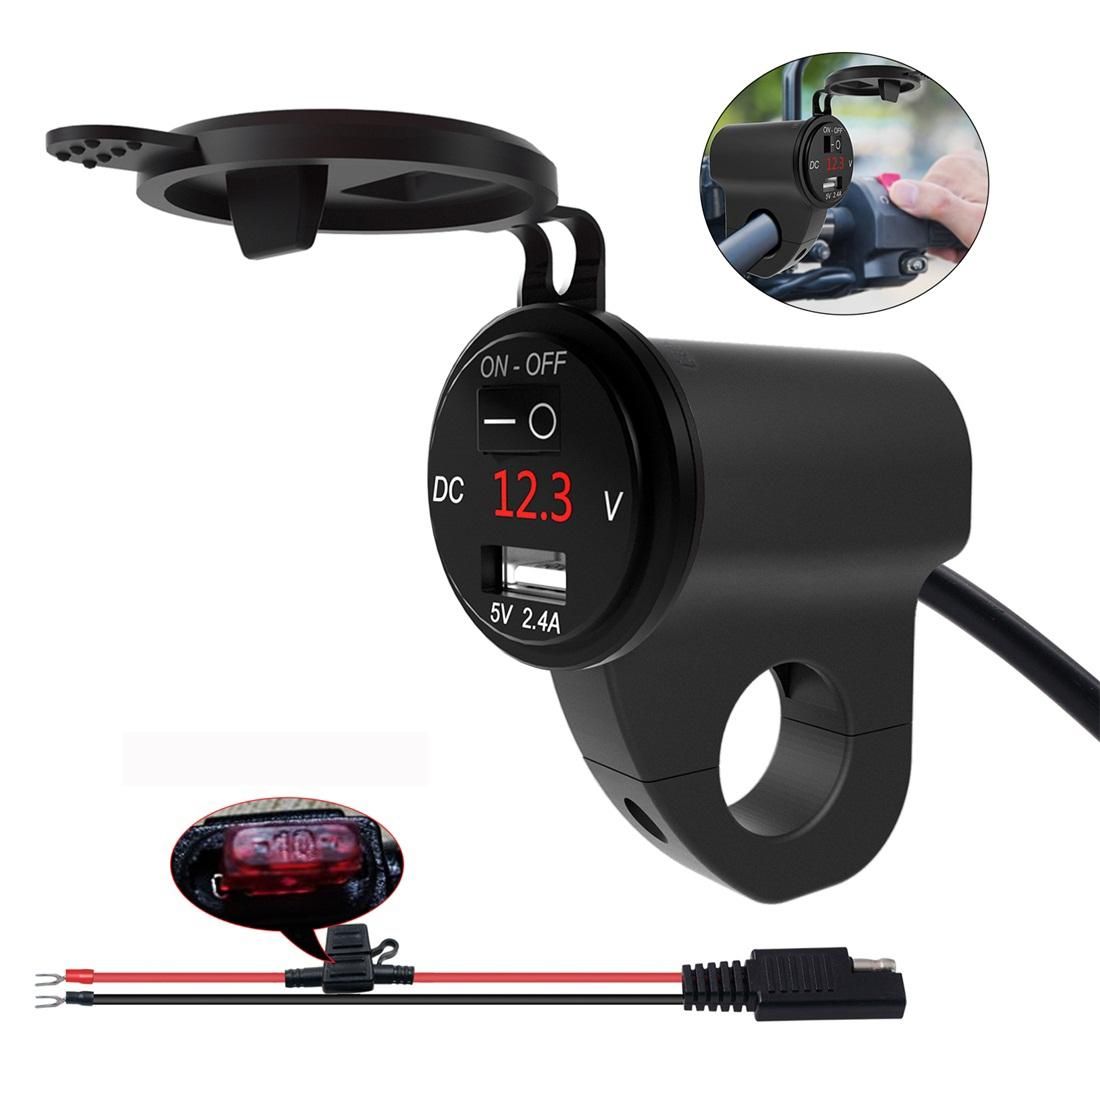 ZH-975B1 Motorcycle Aluminum Alloy Waterproof Mobile Phone Single USB Charger with Red Voltmeter (Black)